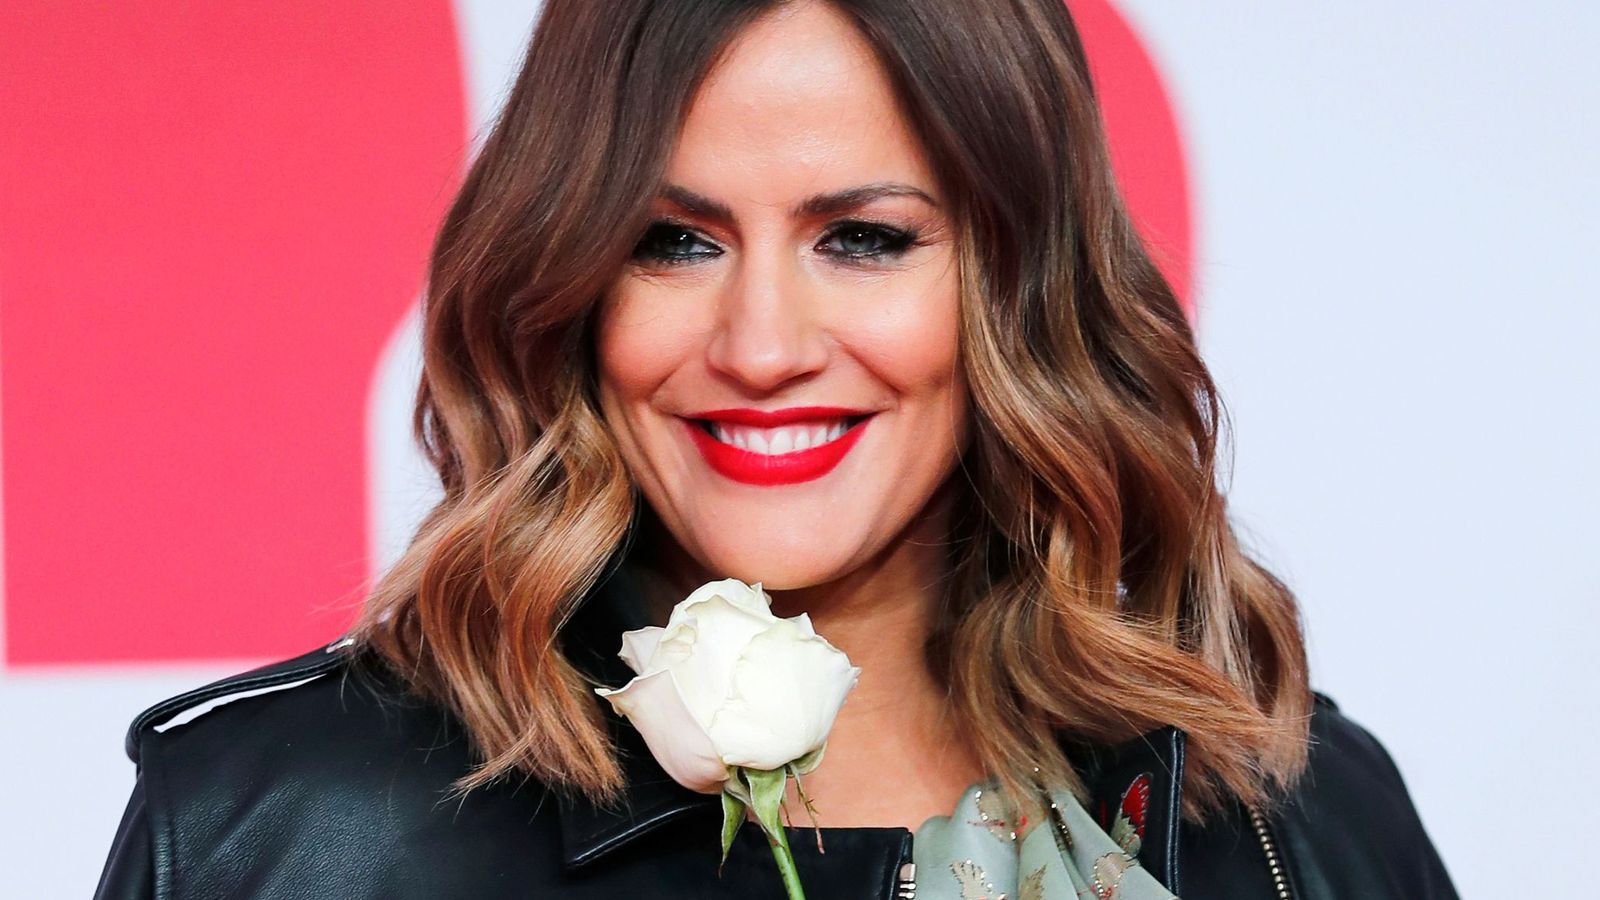 Caroline Flack's celebrity status likely contributed to police charging her with domestic abuse, says mother